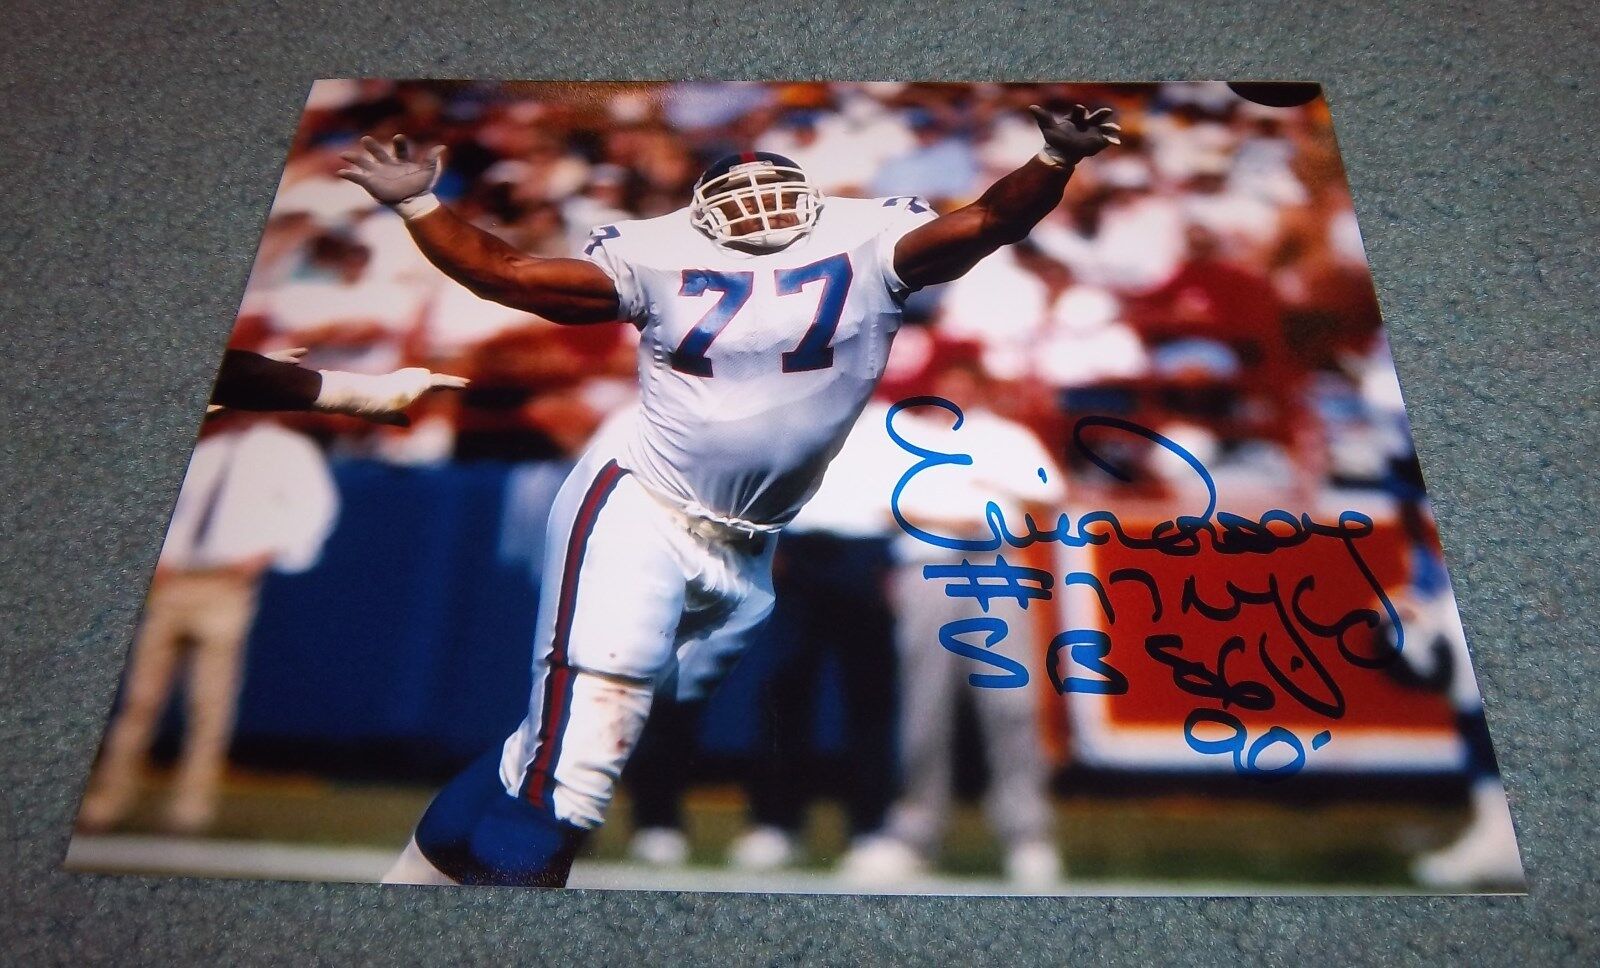 NY Giants Eric Dorsey Signed Autographed 8x10 Photo Poster painting Super Bowl Champs COA A